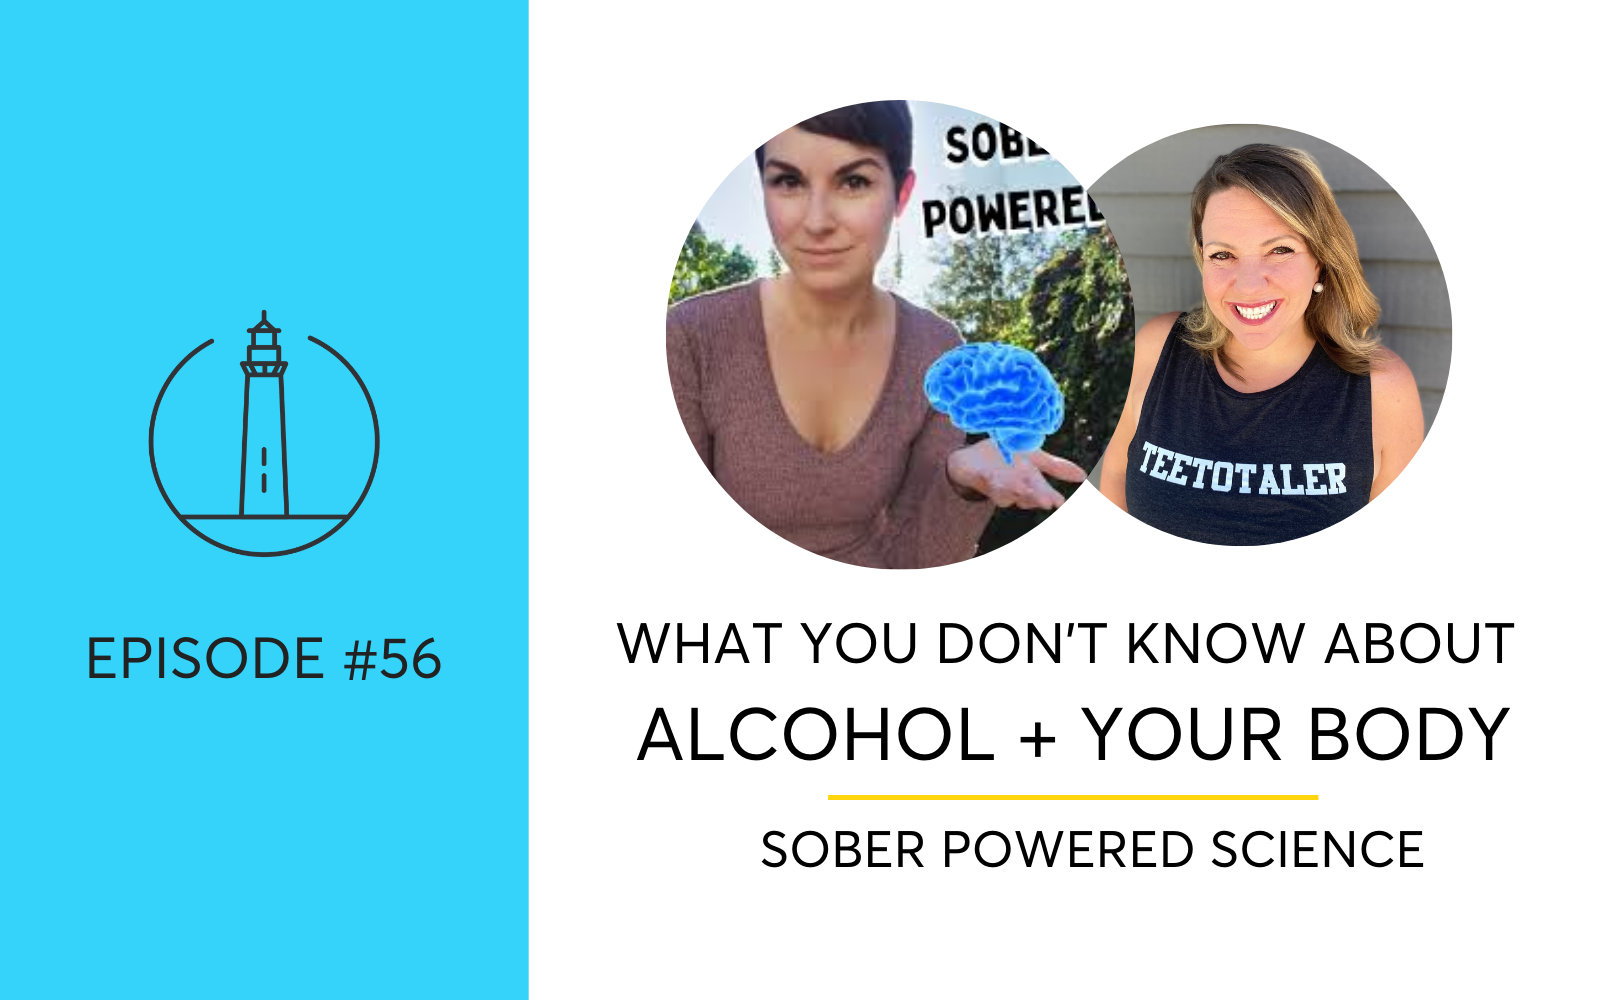 What You Don’t Know About Alcohol And Your Body